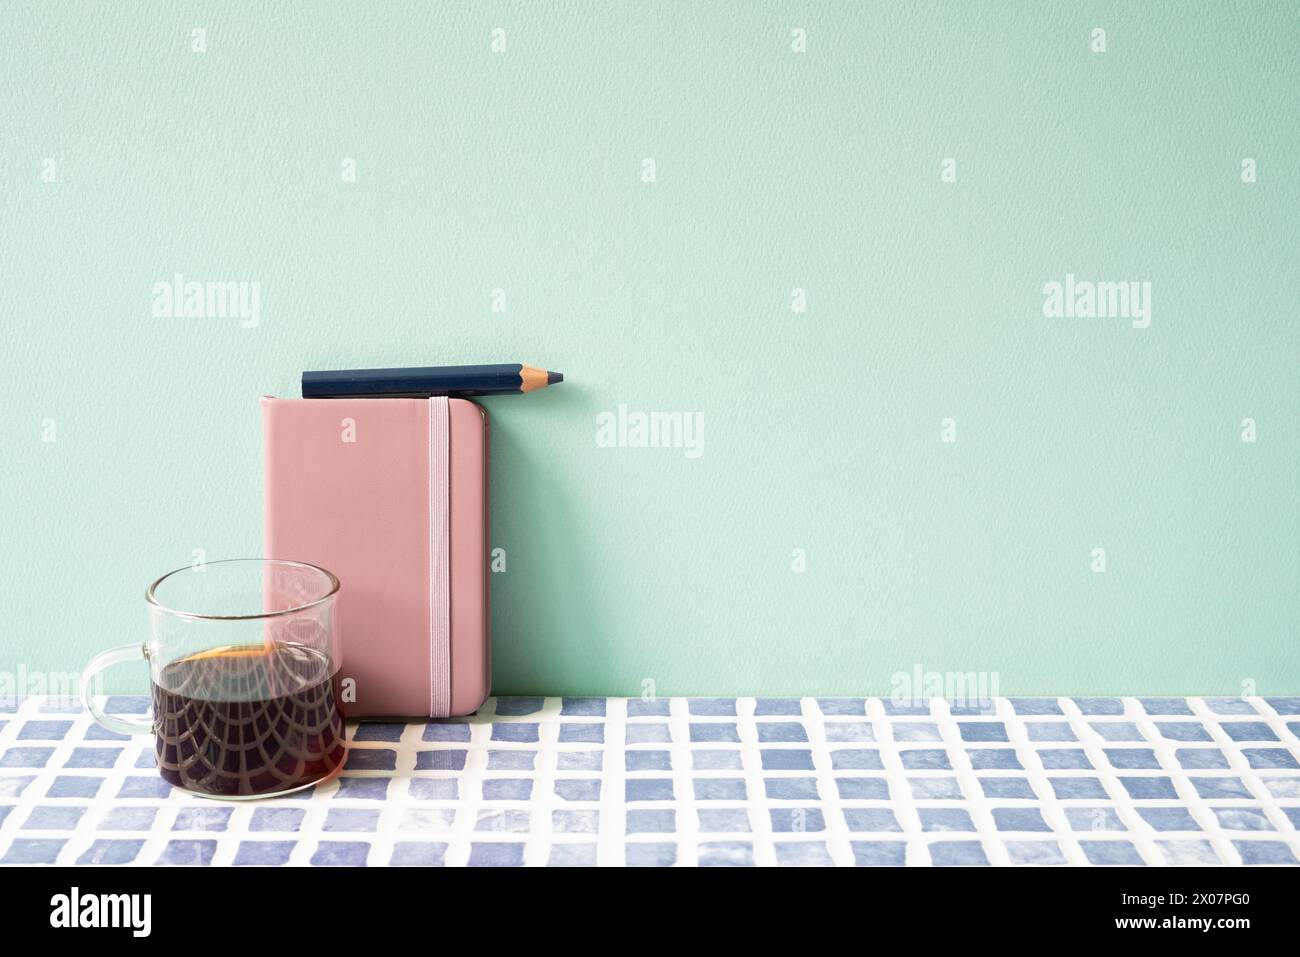 Diary notebook, pencil, coffee on blue tile desk. mint wall background. workspace Stock Photo